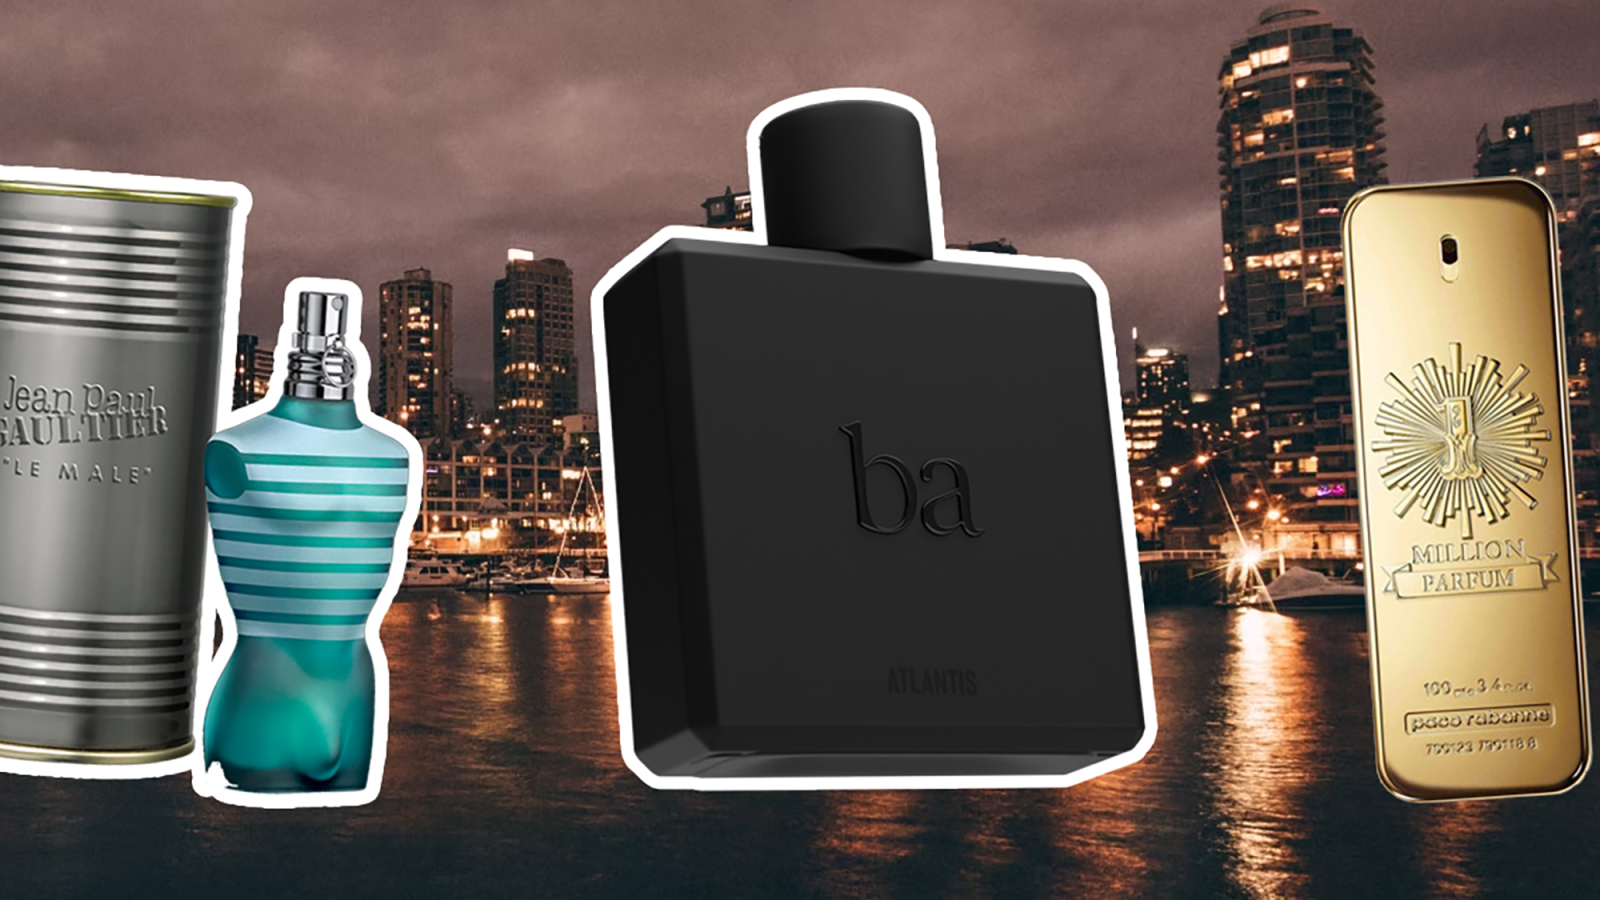 23 Best Colognes for Young Men in 2023